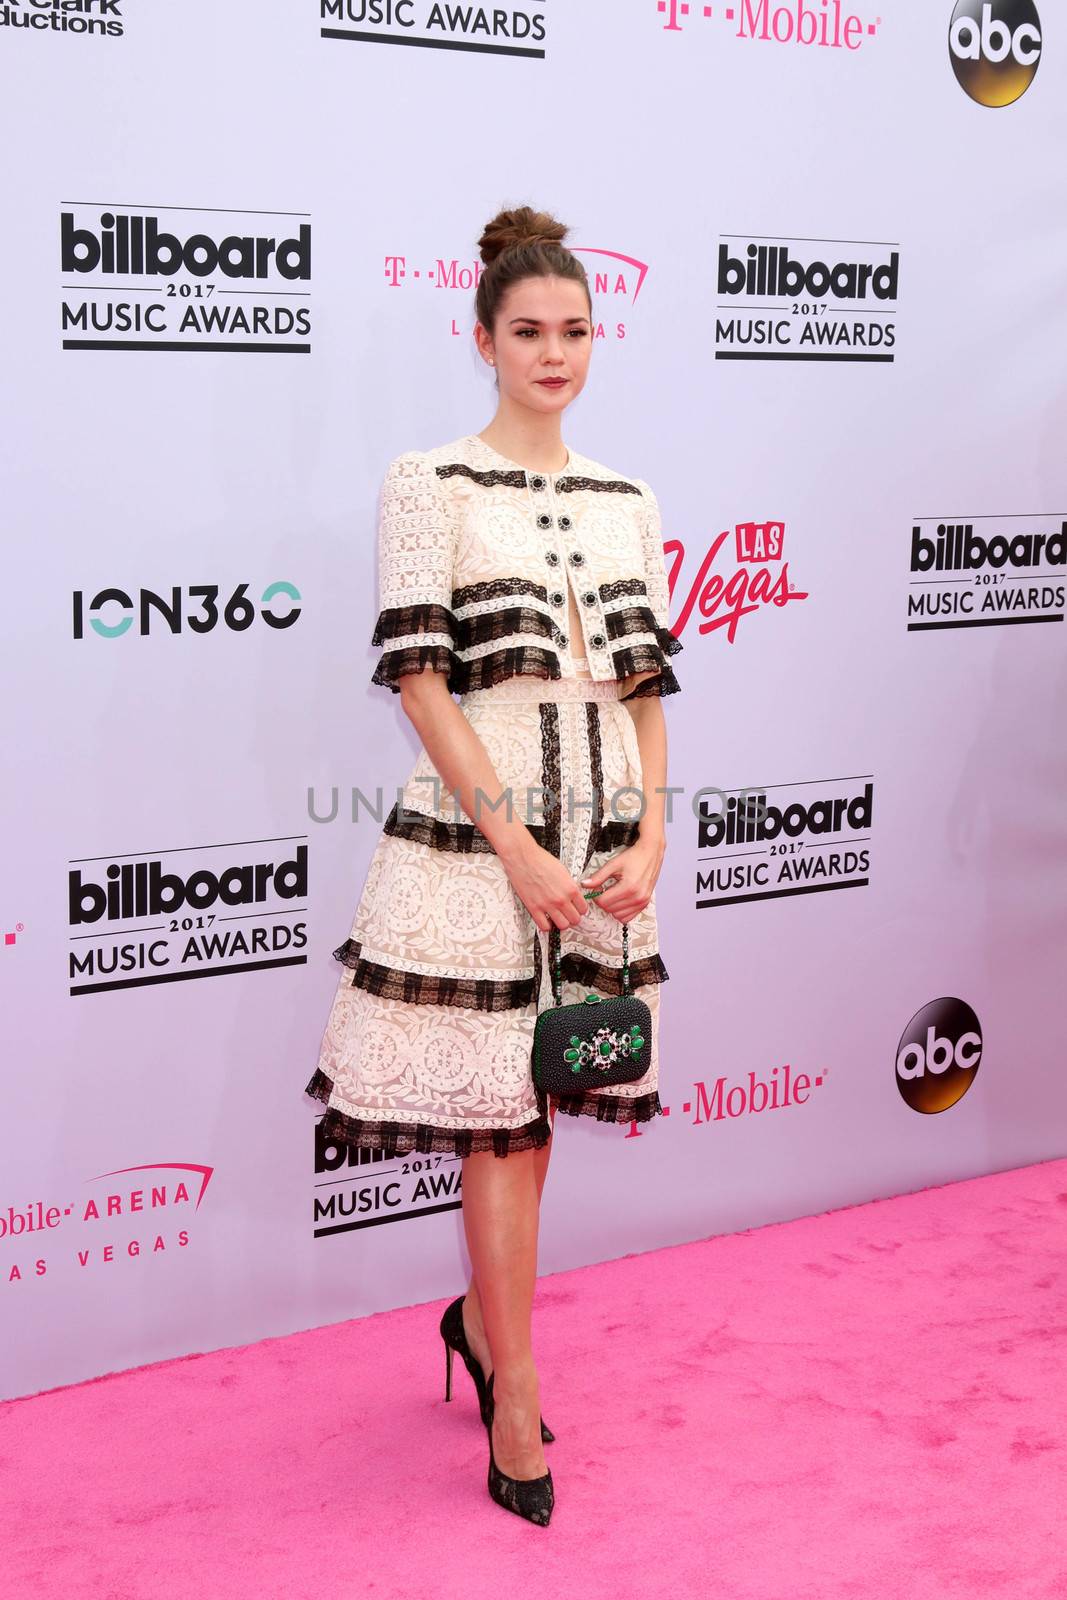 Maia Mitchell at the 2017 Billboard Awards Arrivals, T-Mobile Arena, Las Vegas, NV 05-21-17/ImageCollect by ImageCollect